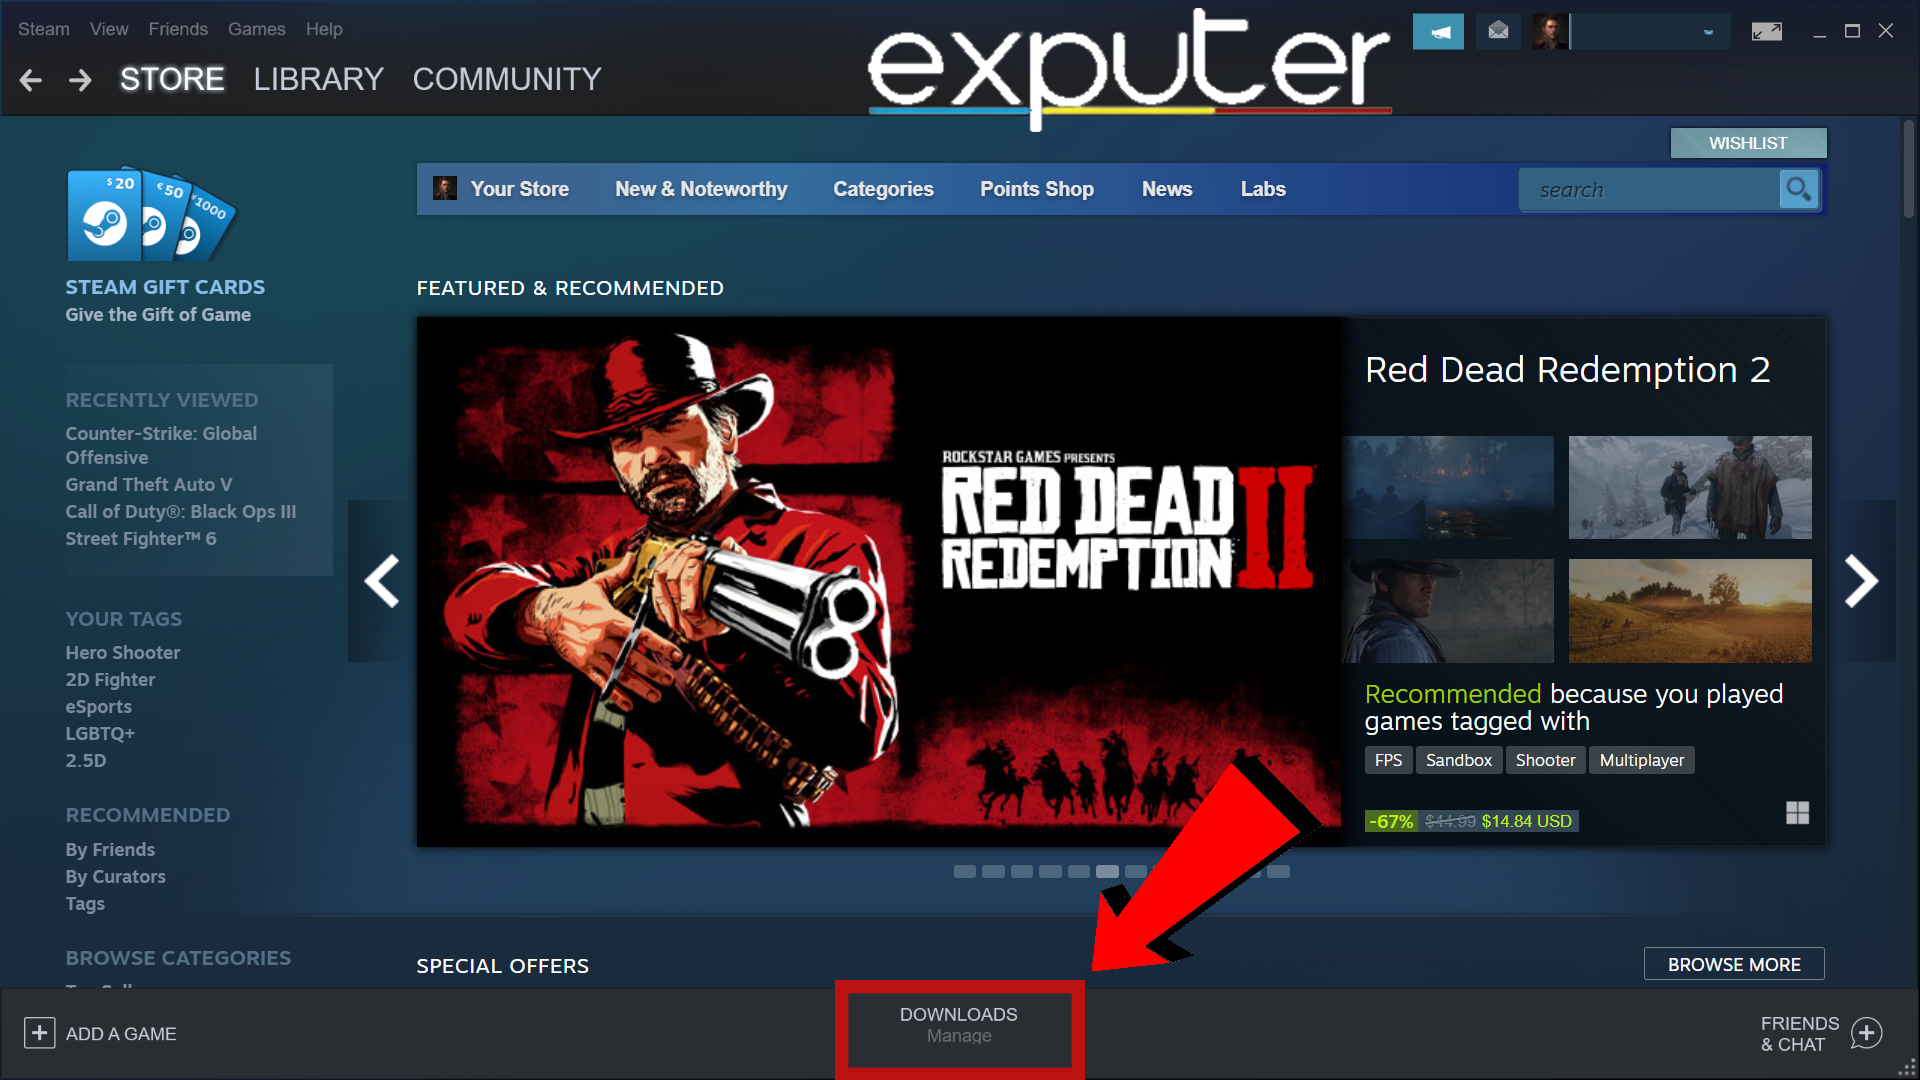 Opening Download section in Steam. (image captured by eXputer)